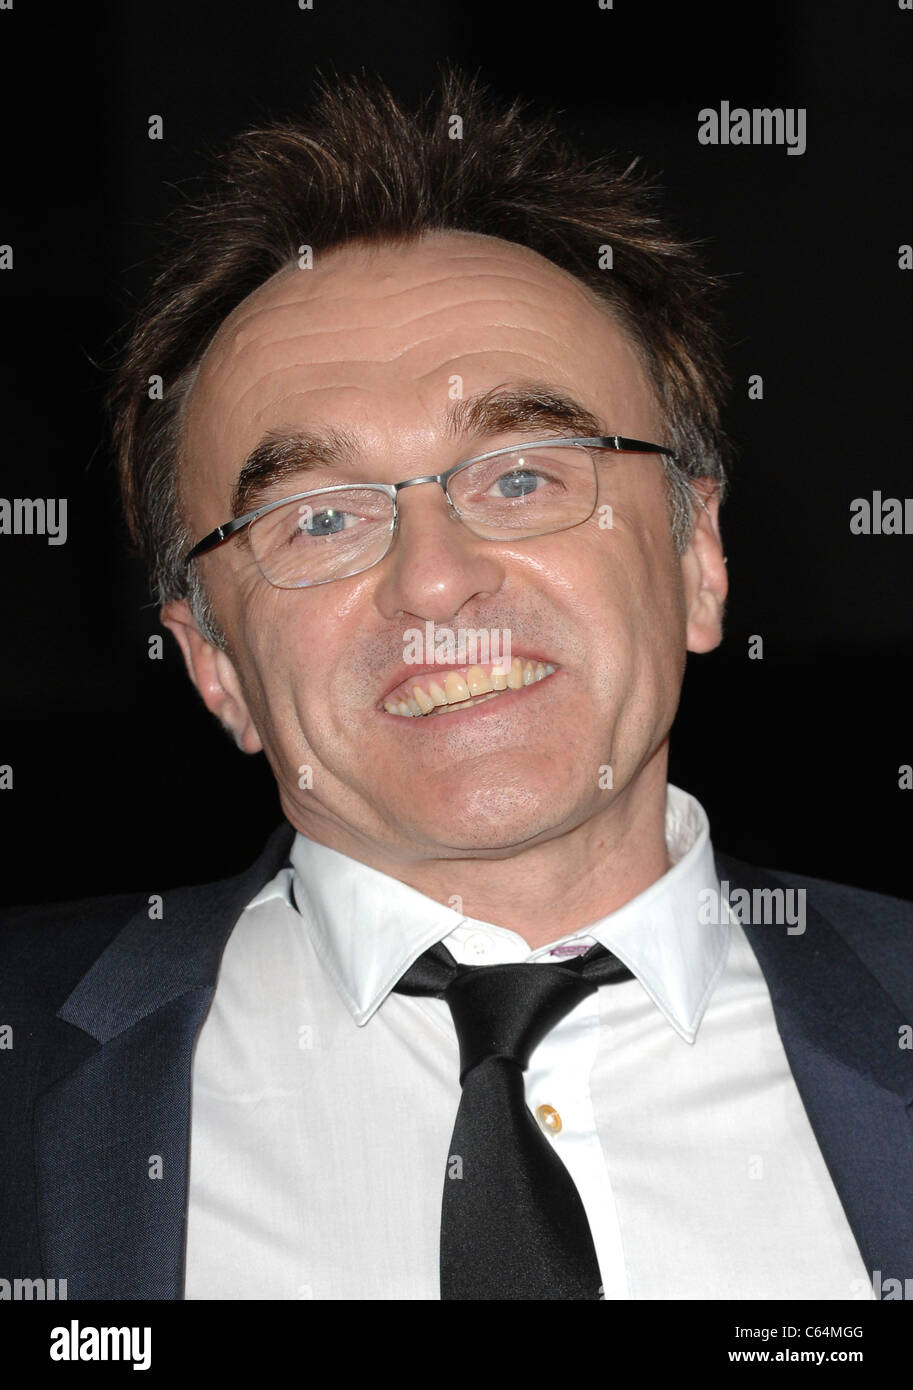 Danny Boyle at arrivals for 127 HOURS Screening, Academy of Motion Picture Arts and Sciences, Beverly Hills, CA November 3, 2010. Photo By: Elizabeth Goodenough/Everett Collection Stock Photo